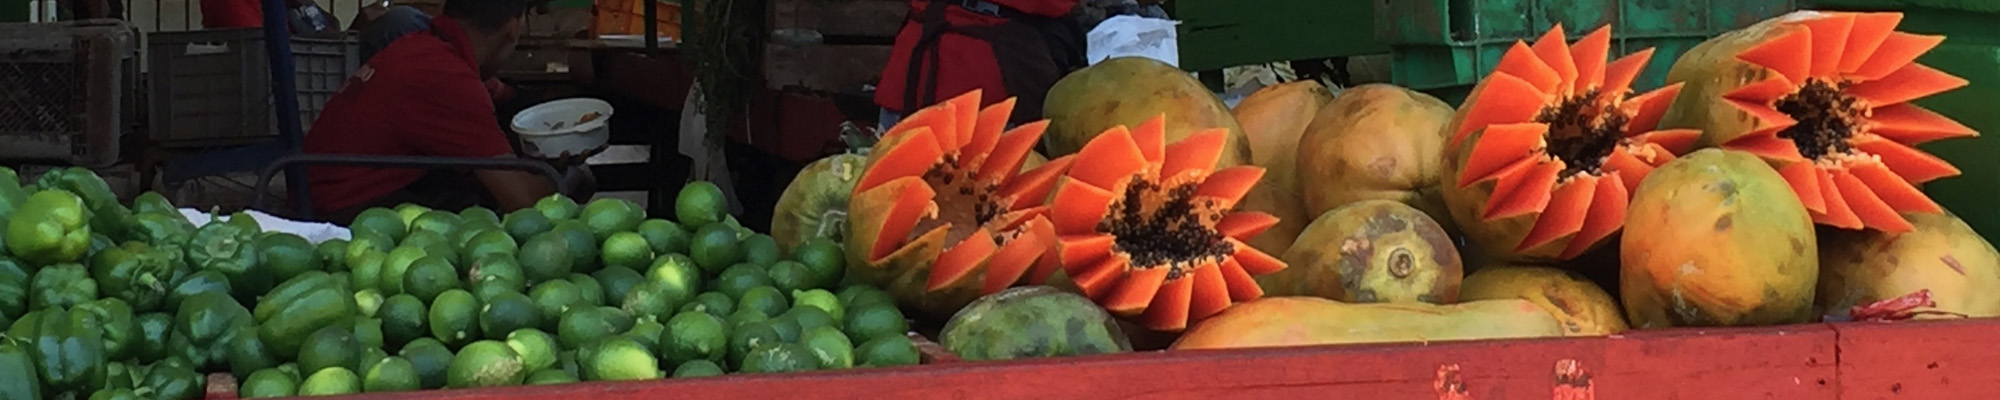 fruit stand in Mexico